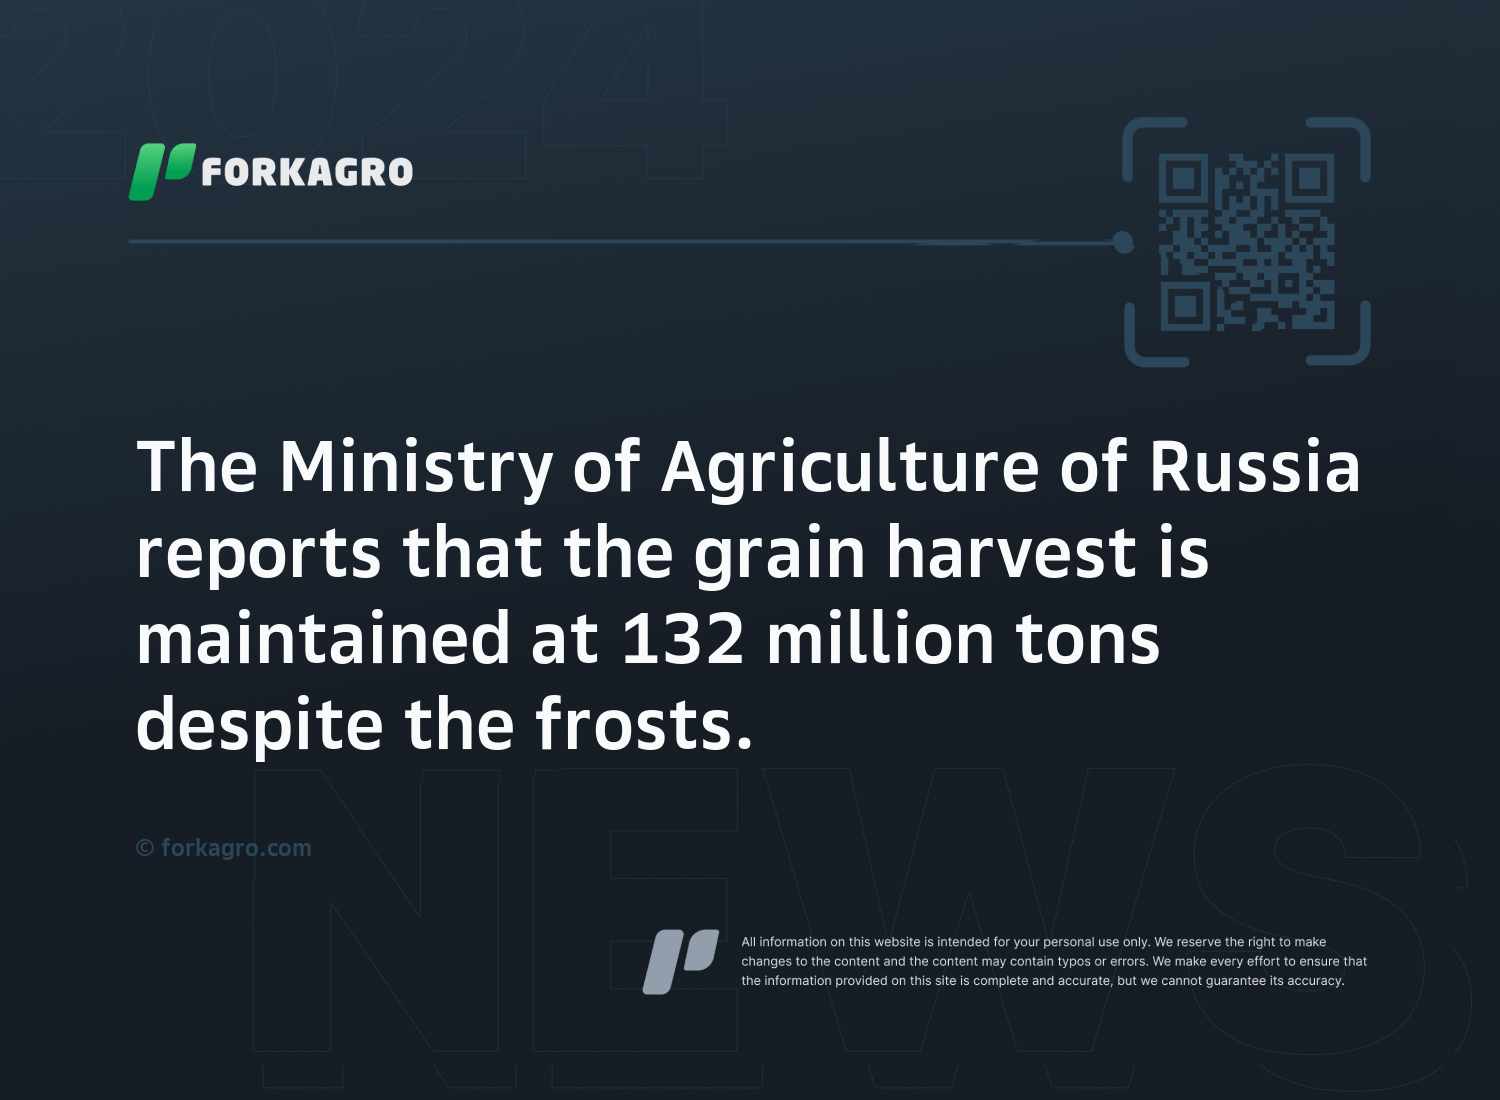 The Ministry of Agriculture of Russia reports that the grain harvest is maintained at 132 million tons despite the frosts.